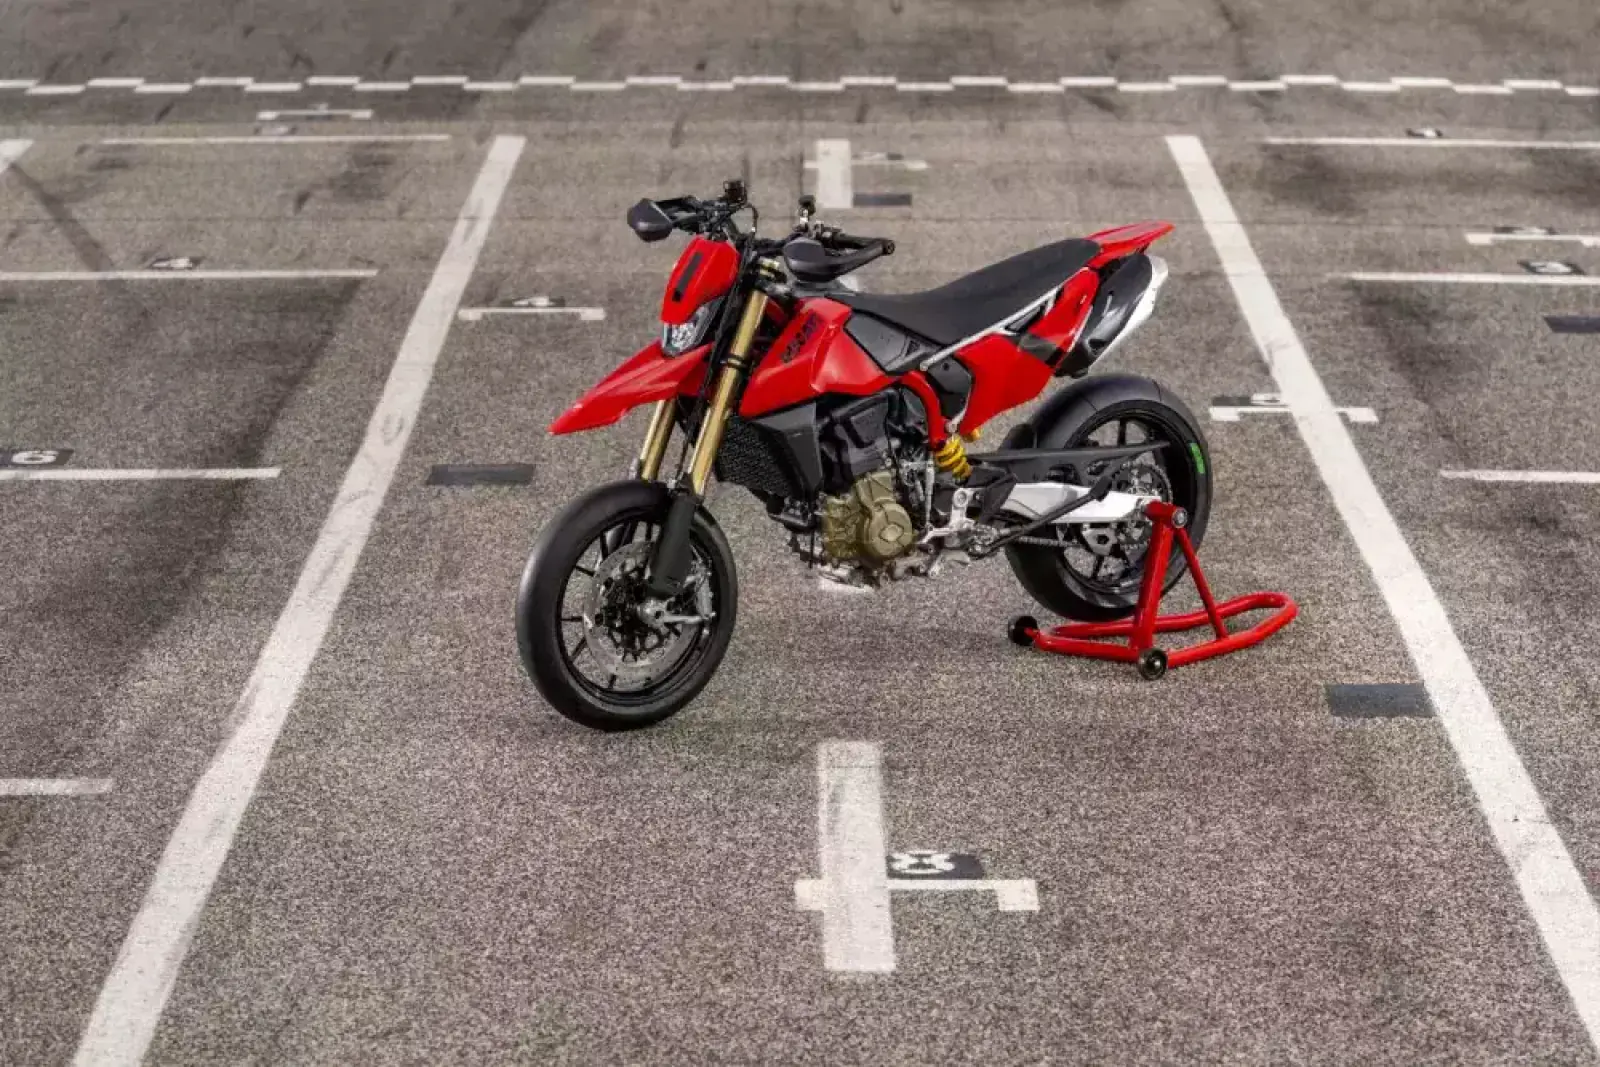 First glimpse of Ducati Hypermotard 698 Mono surfaced, will be launched in the Indian market soon